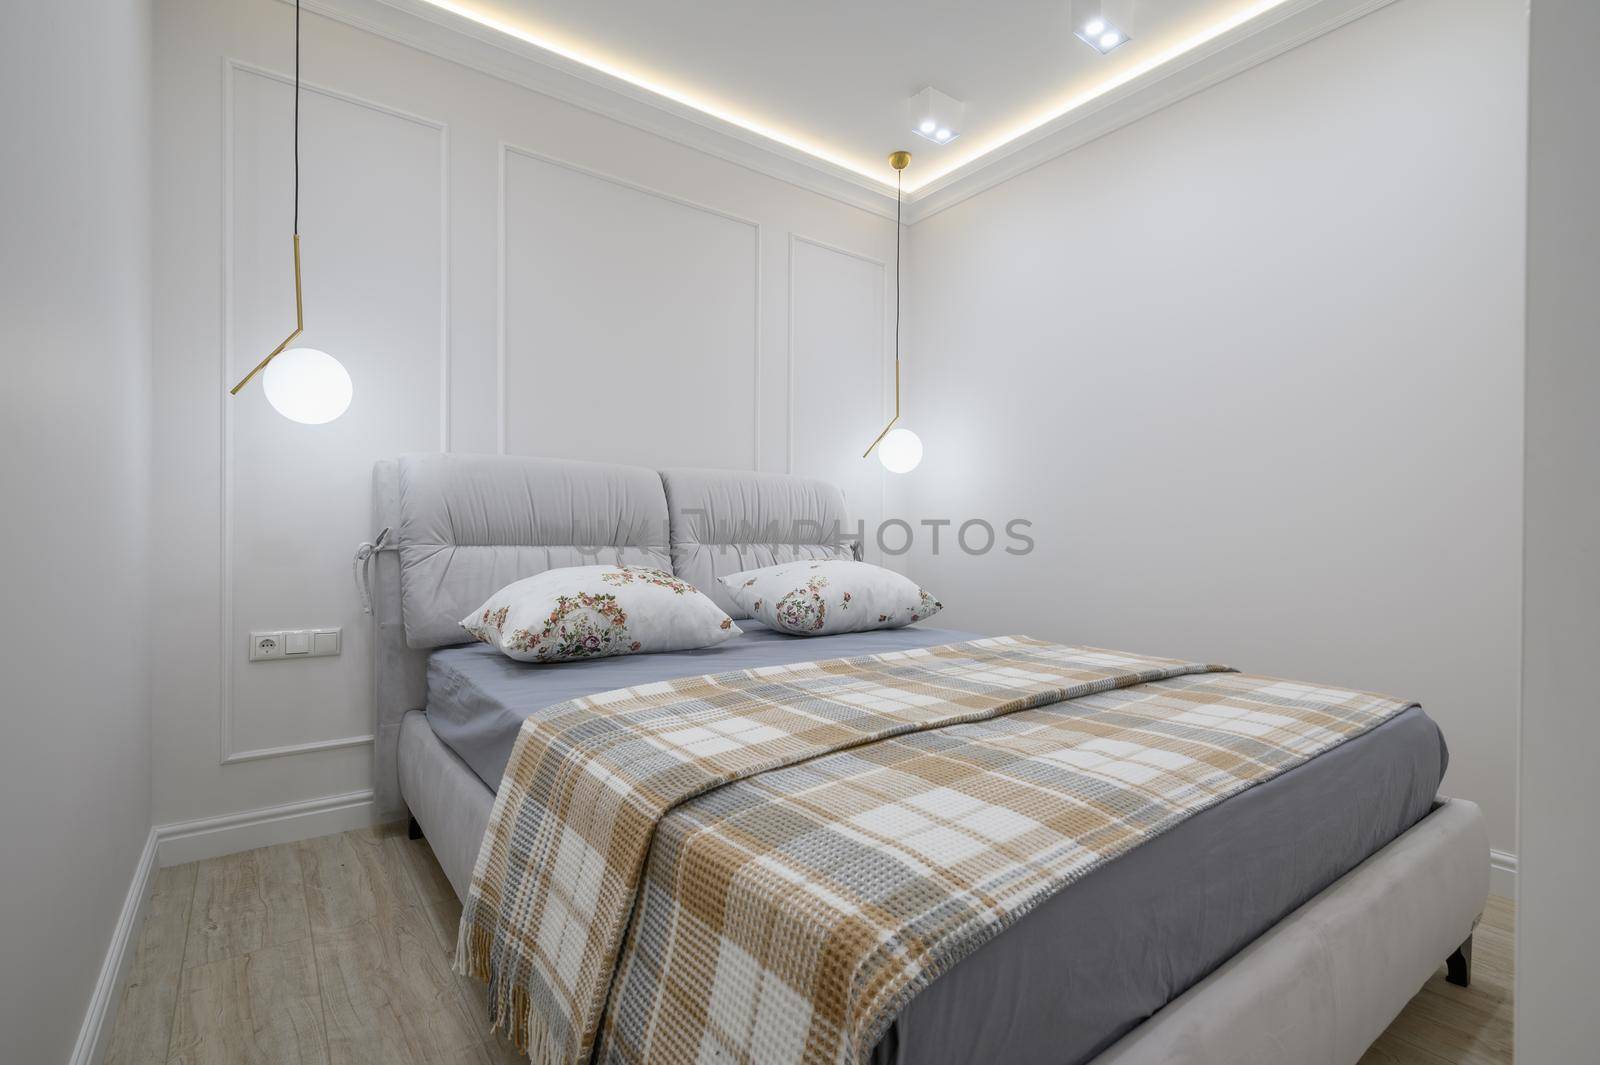 Double bed with a plaid blanket and pillows on it in a cozy bedroom with white walls and wood floors and a light fixtures